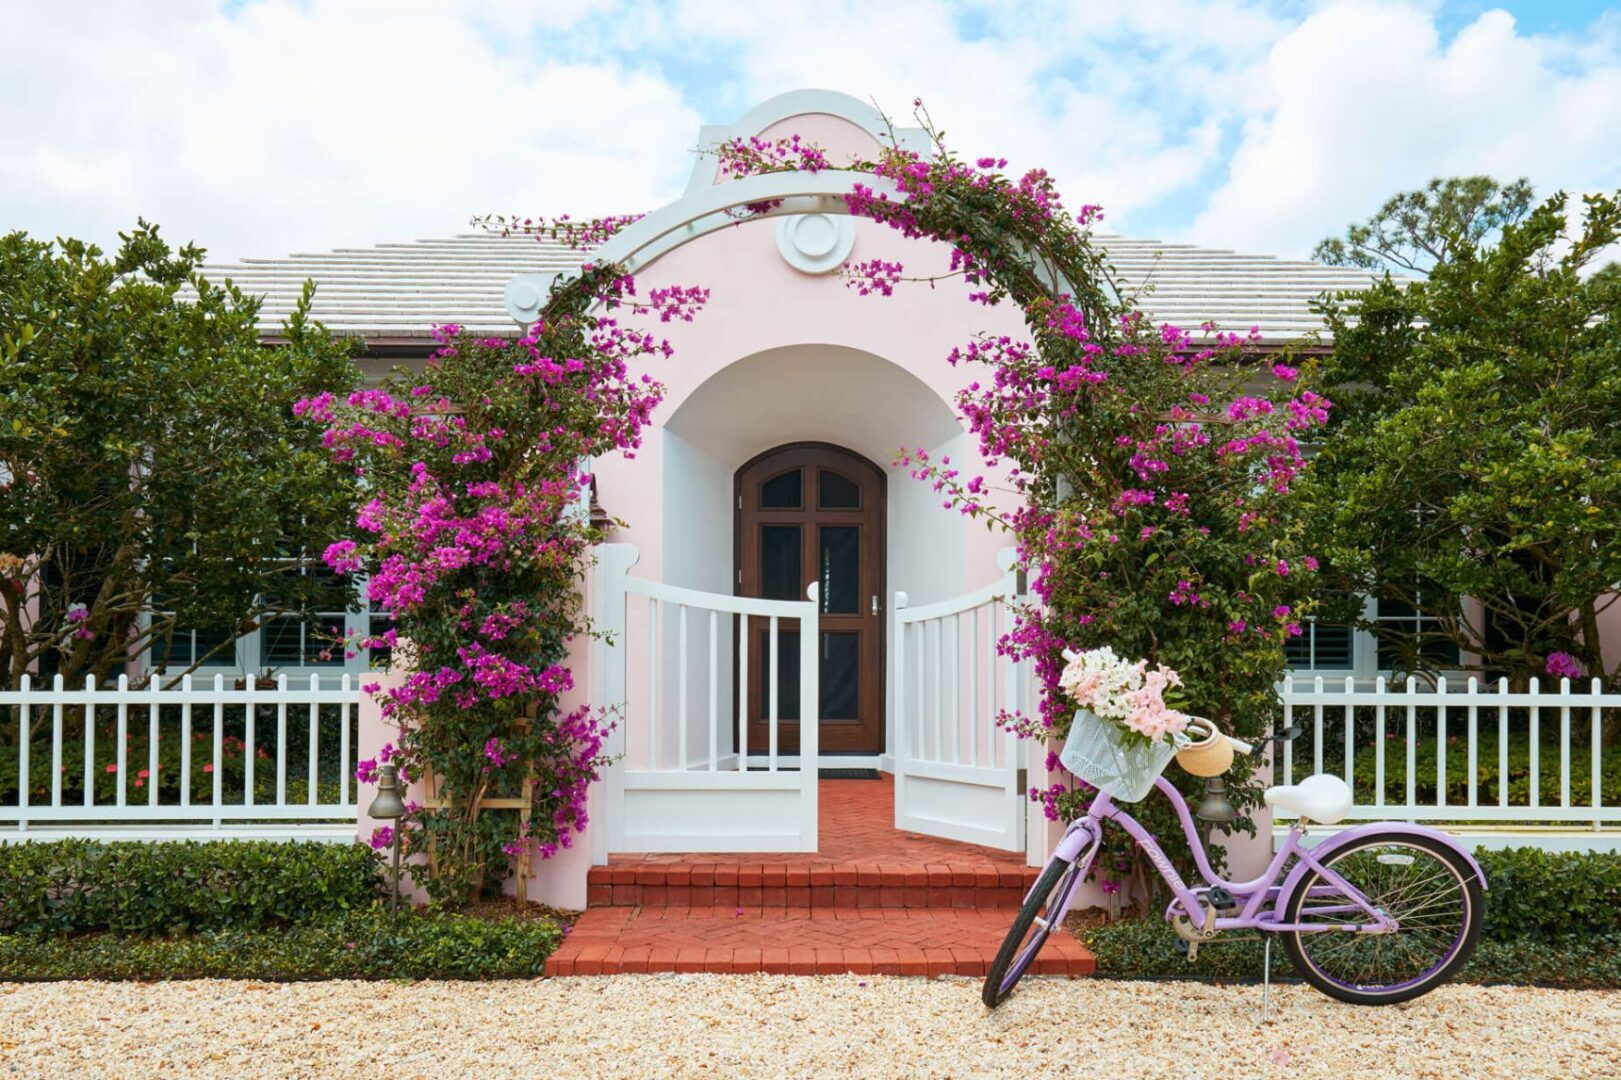 A bicycle parked in front of a house with flowers on the steps.